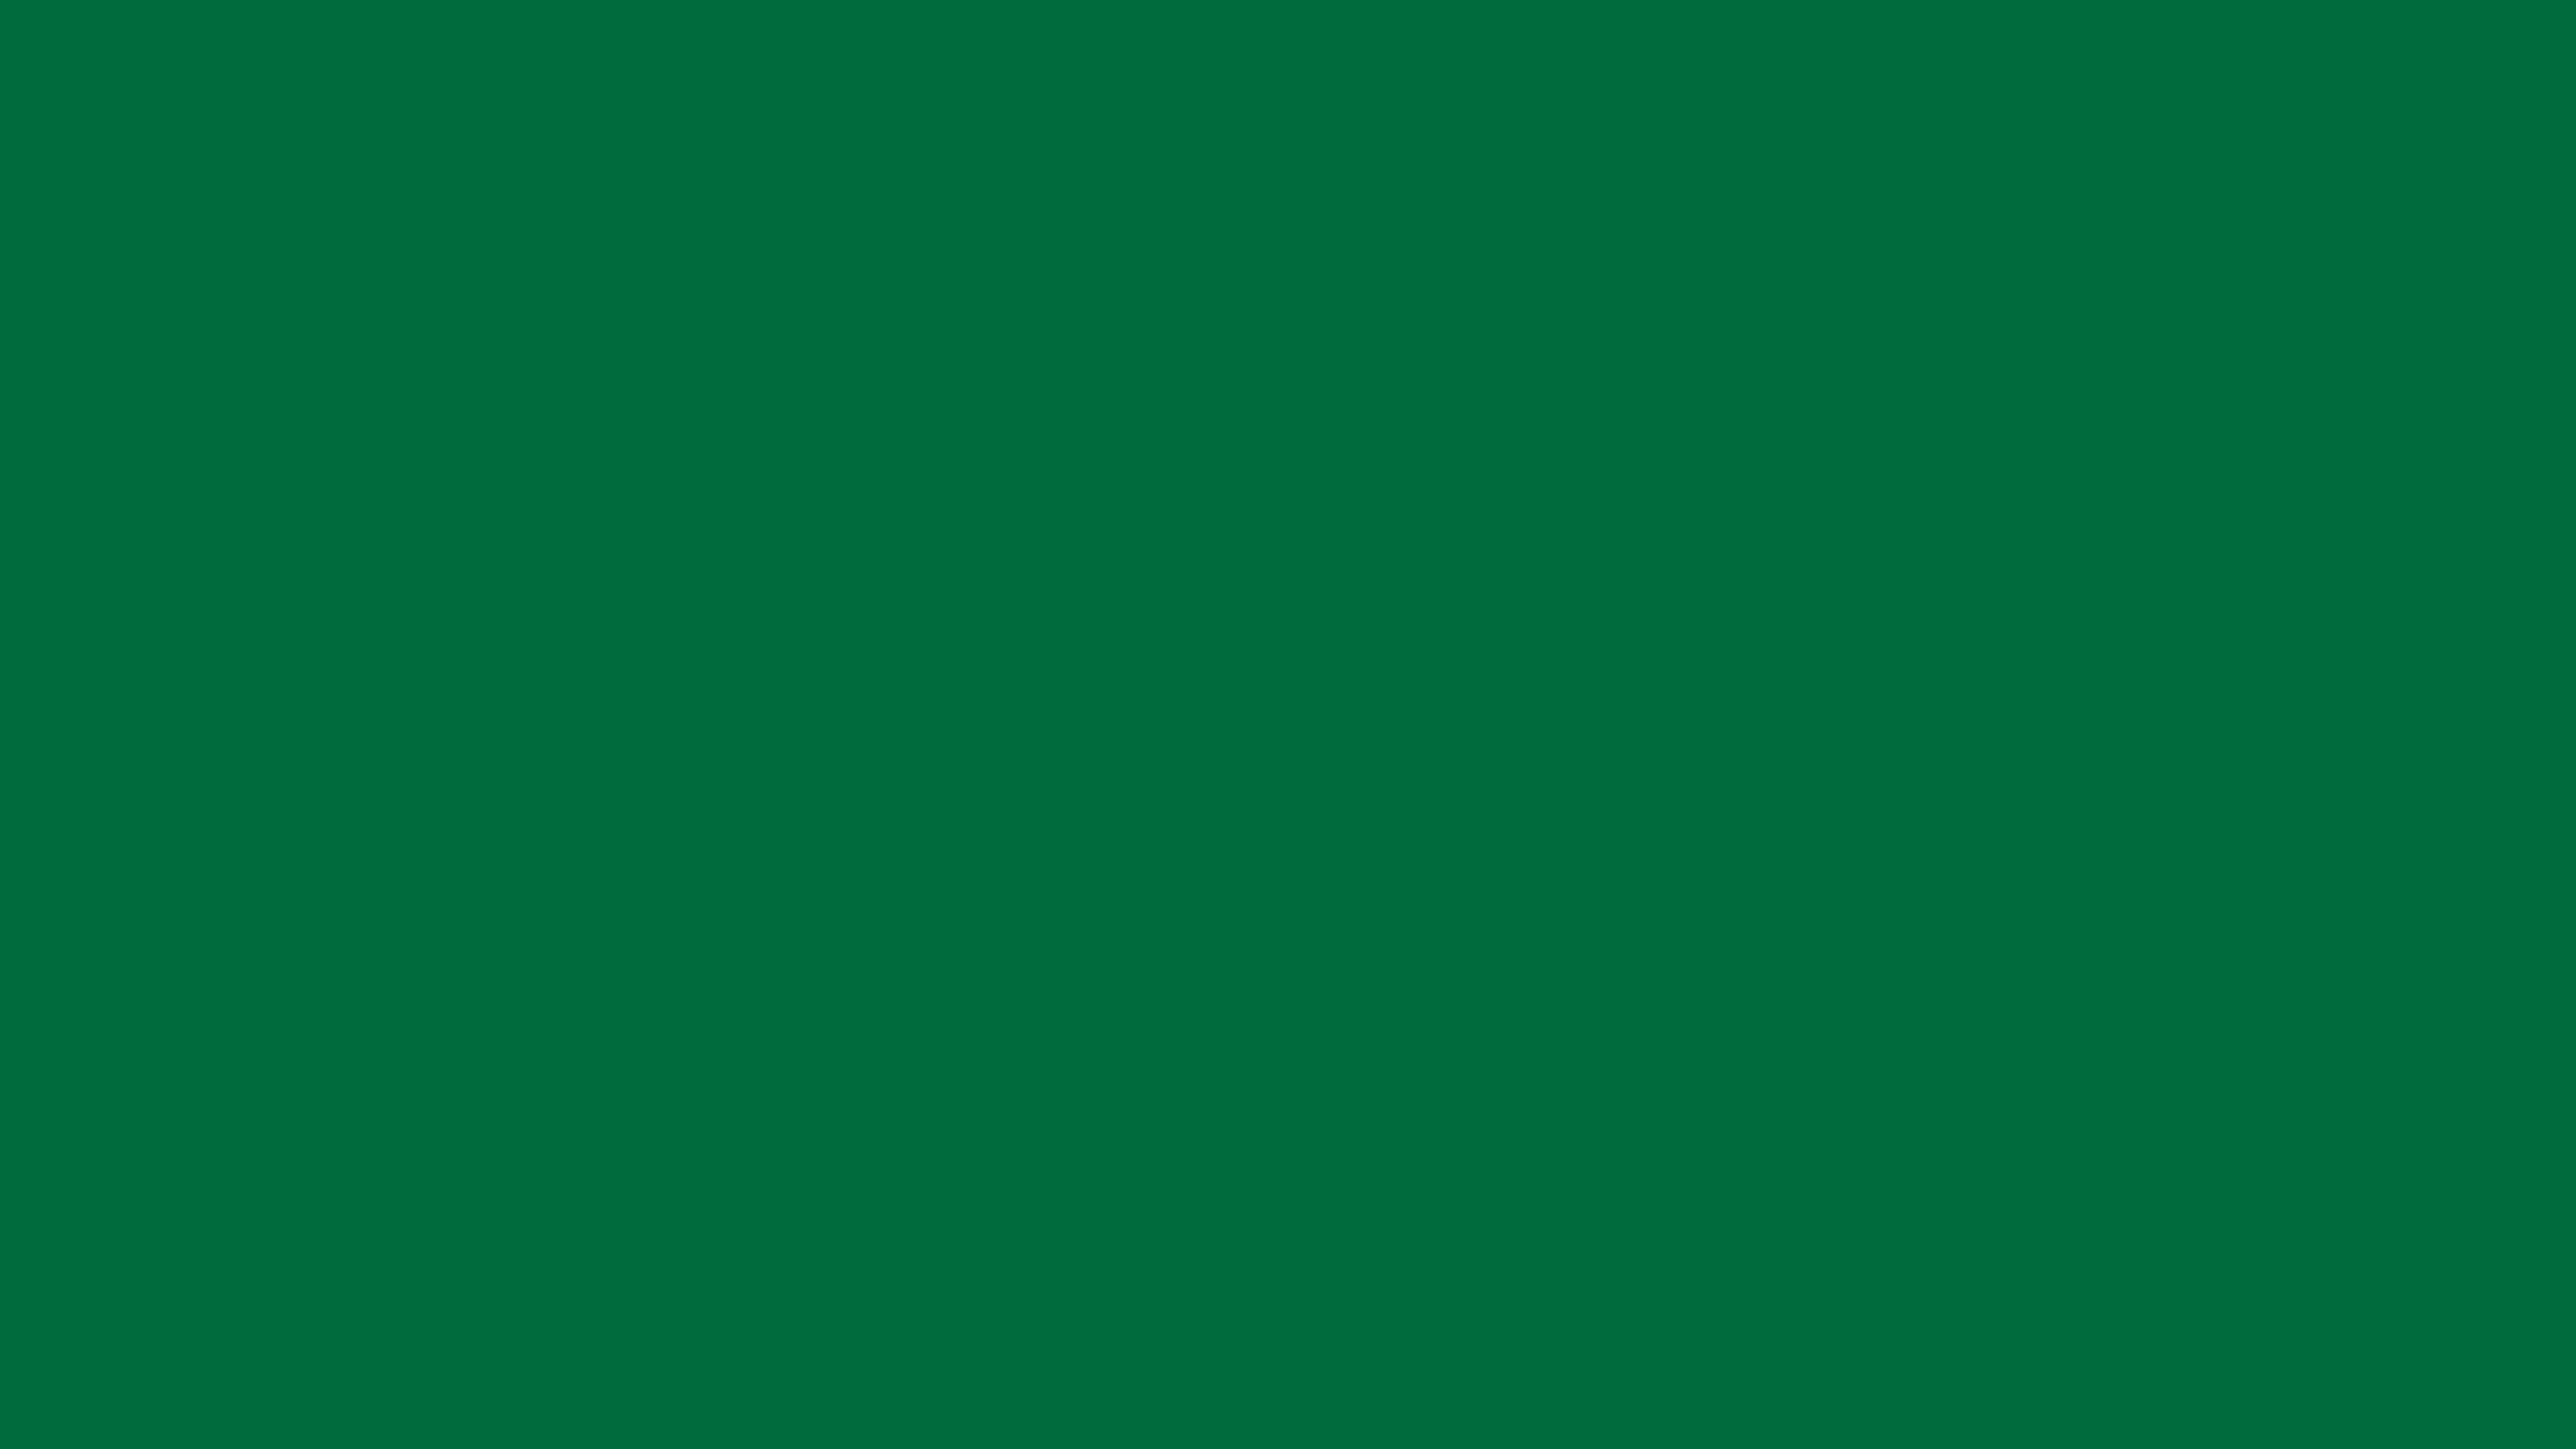 4096x2304 Cadmium Green Solid Color Background